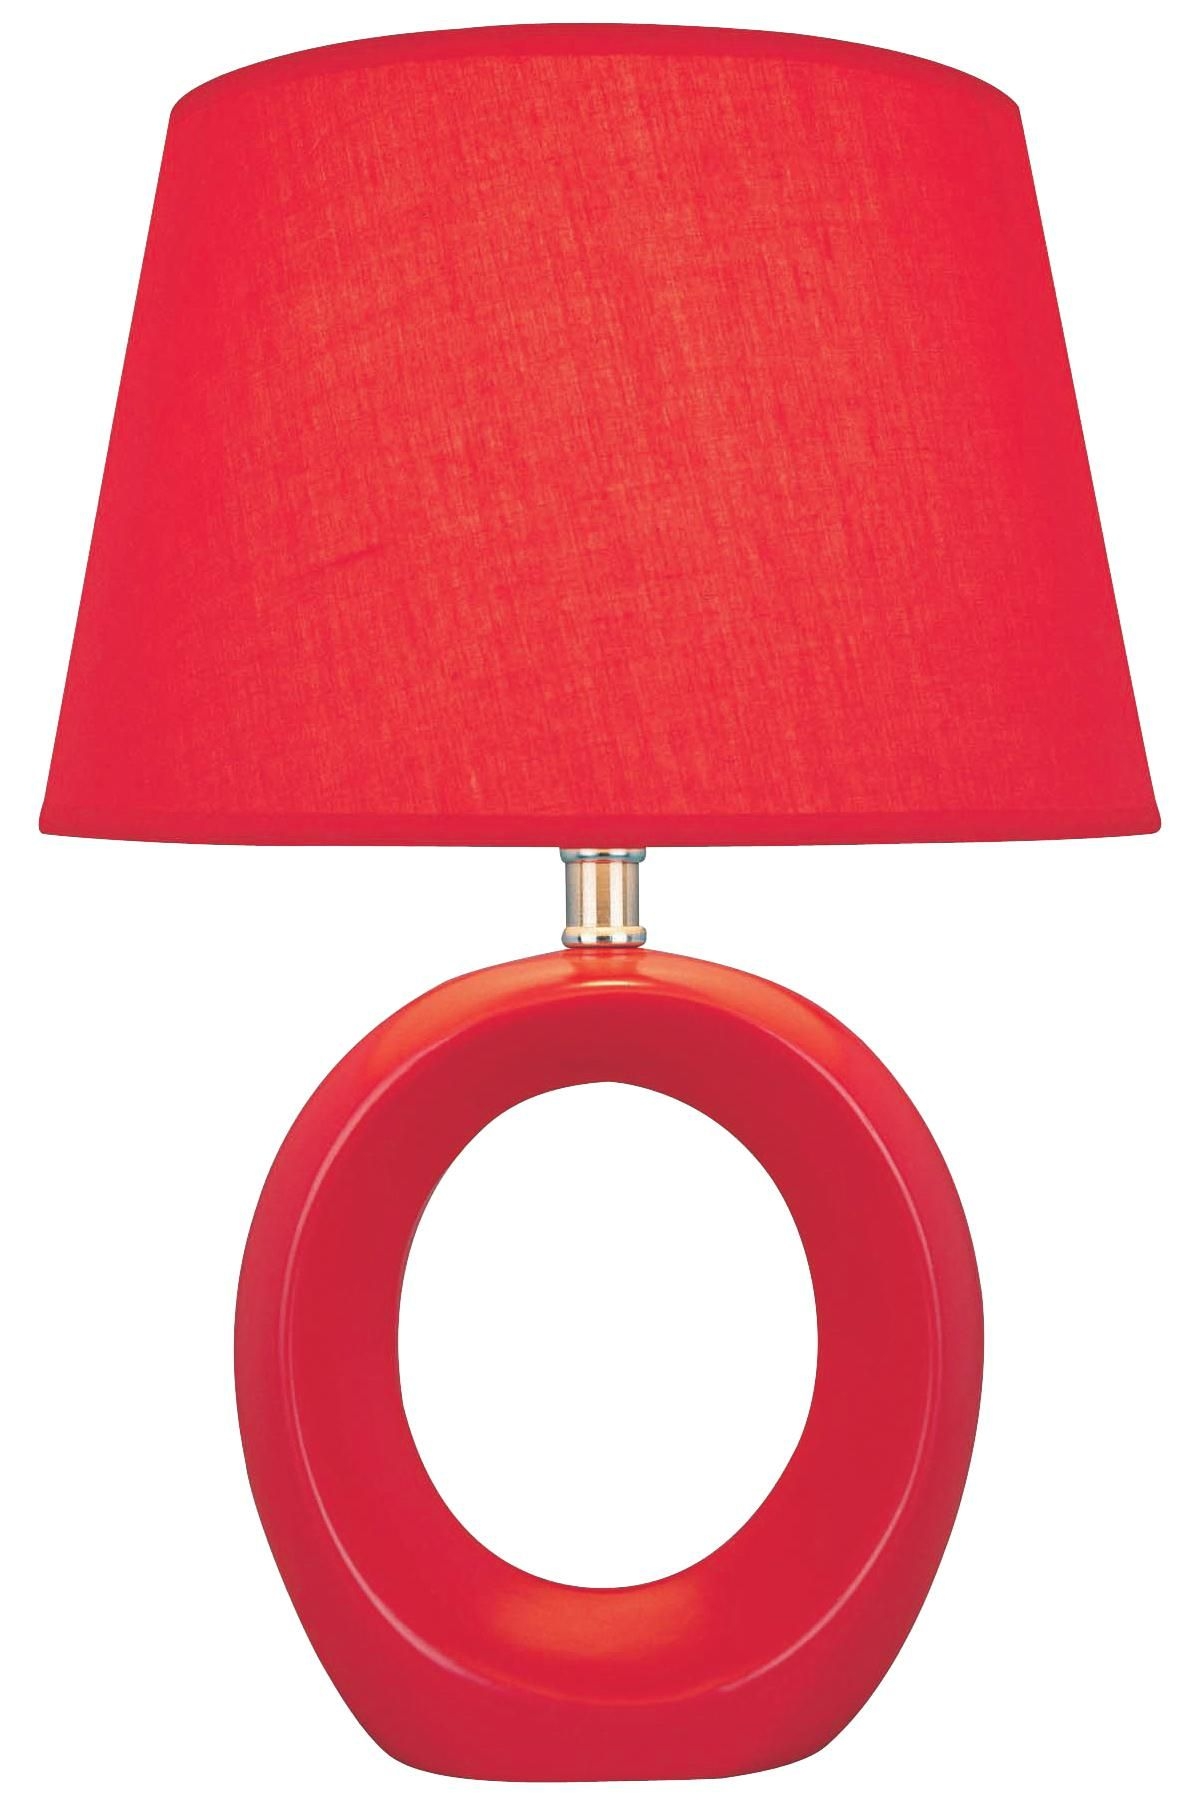 Bellona 17" H Table Lamp with Empire Shade